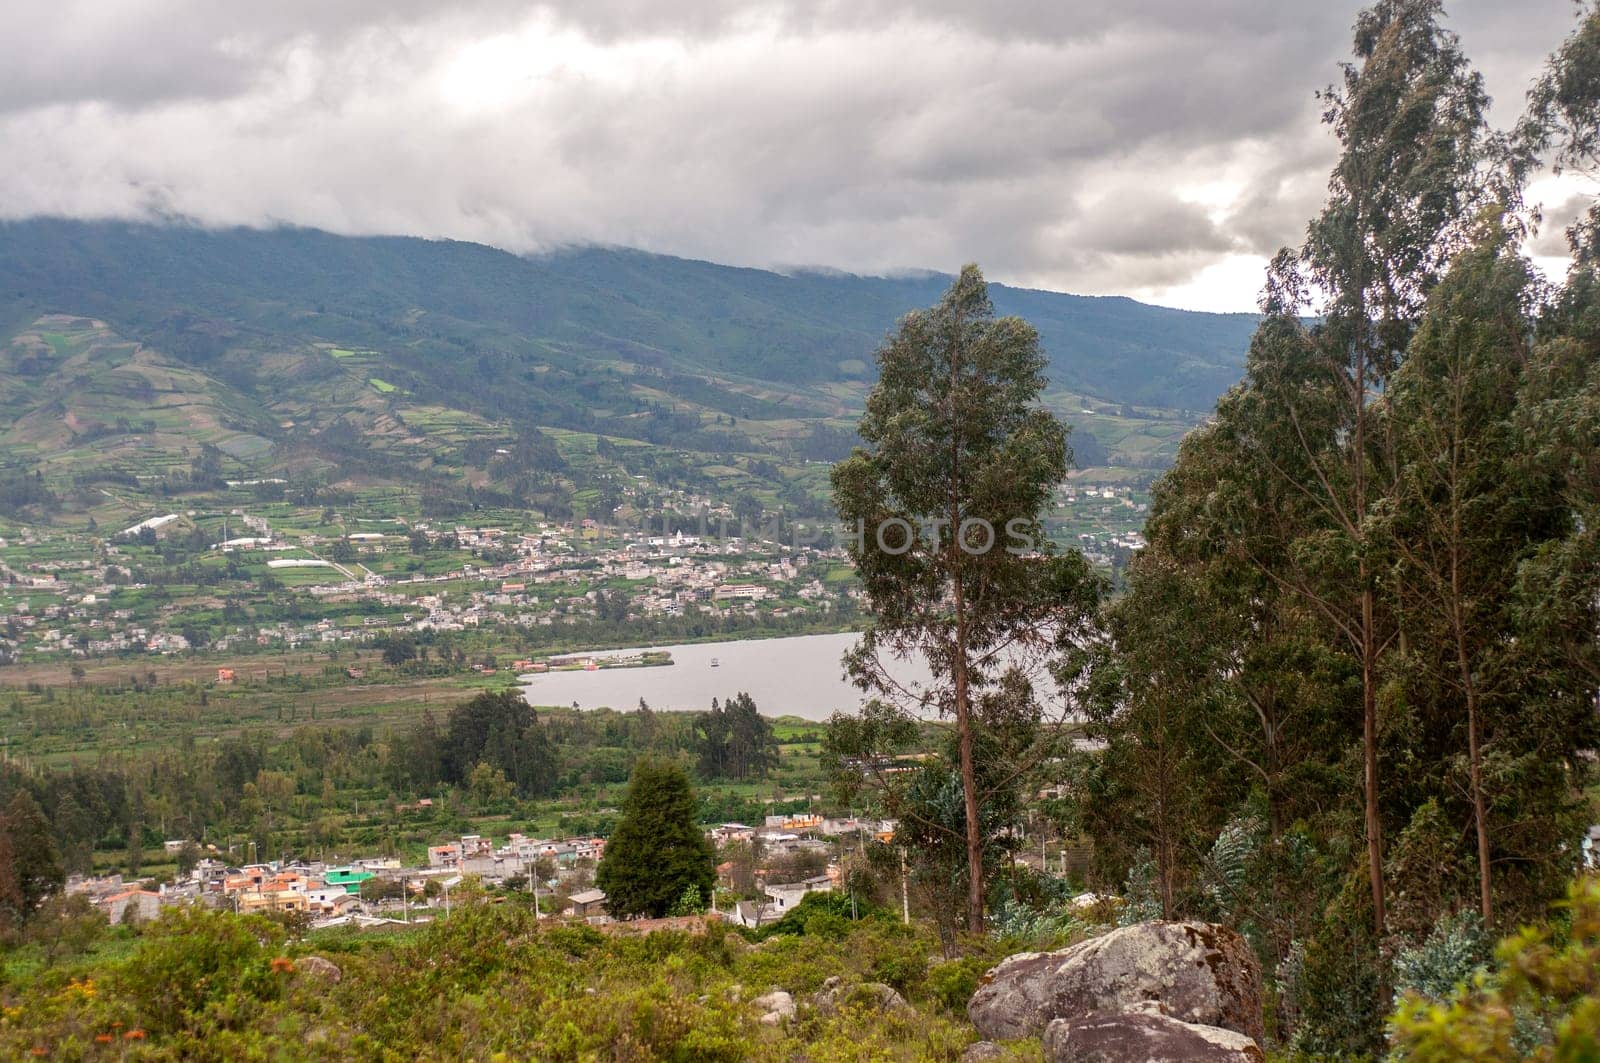 This photo captures a birds-eye view of a town and lake in Ecuador, offering a panoramic perspective of the landscape.